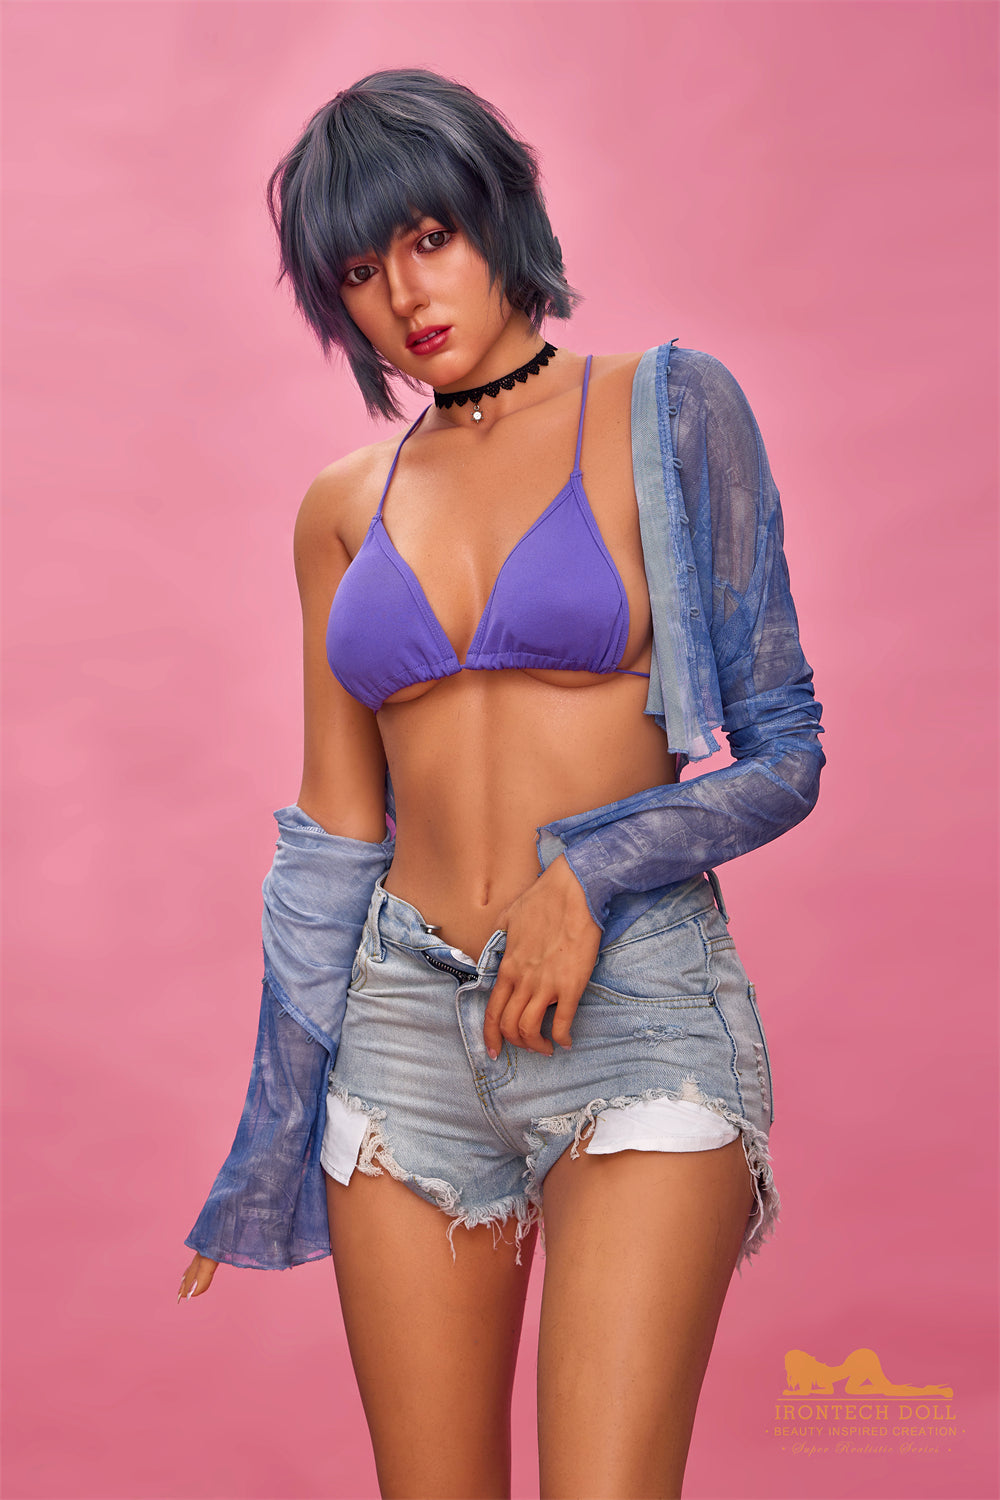 Irontech Doll 168 cm Silicone - Fenny | Buy Sex Dolls at DOLLS ACTUALLY